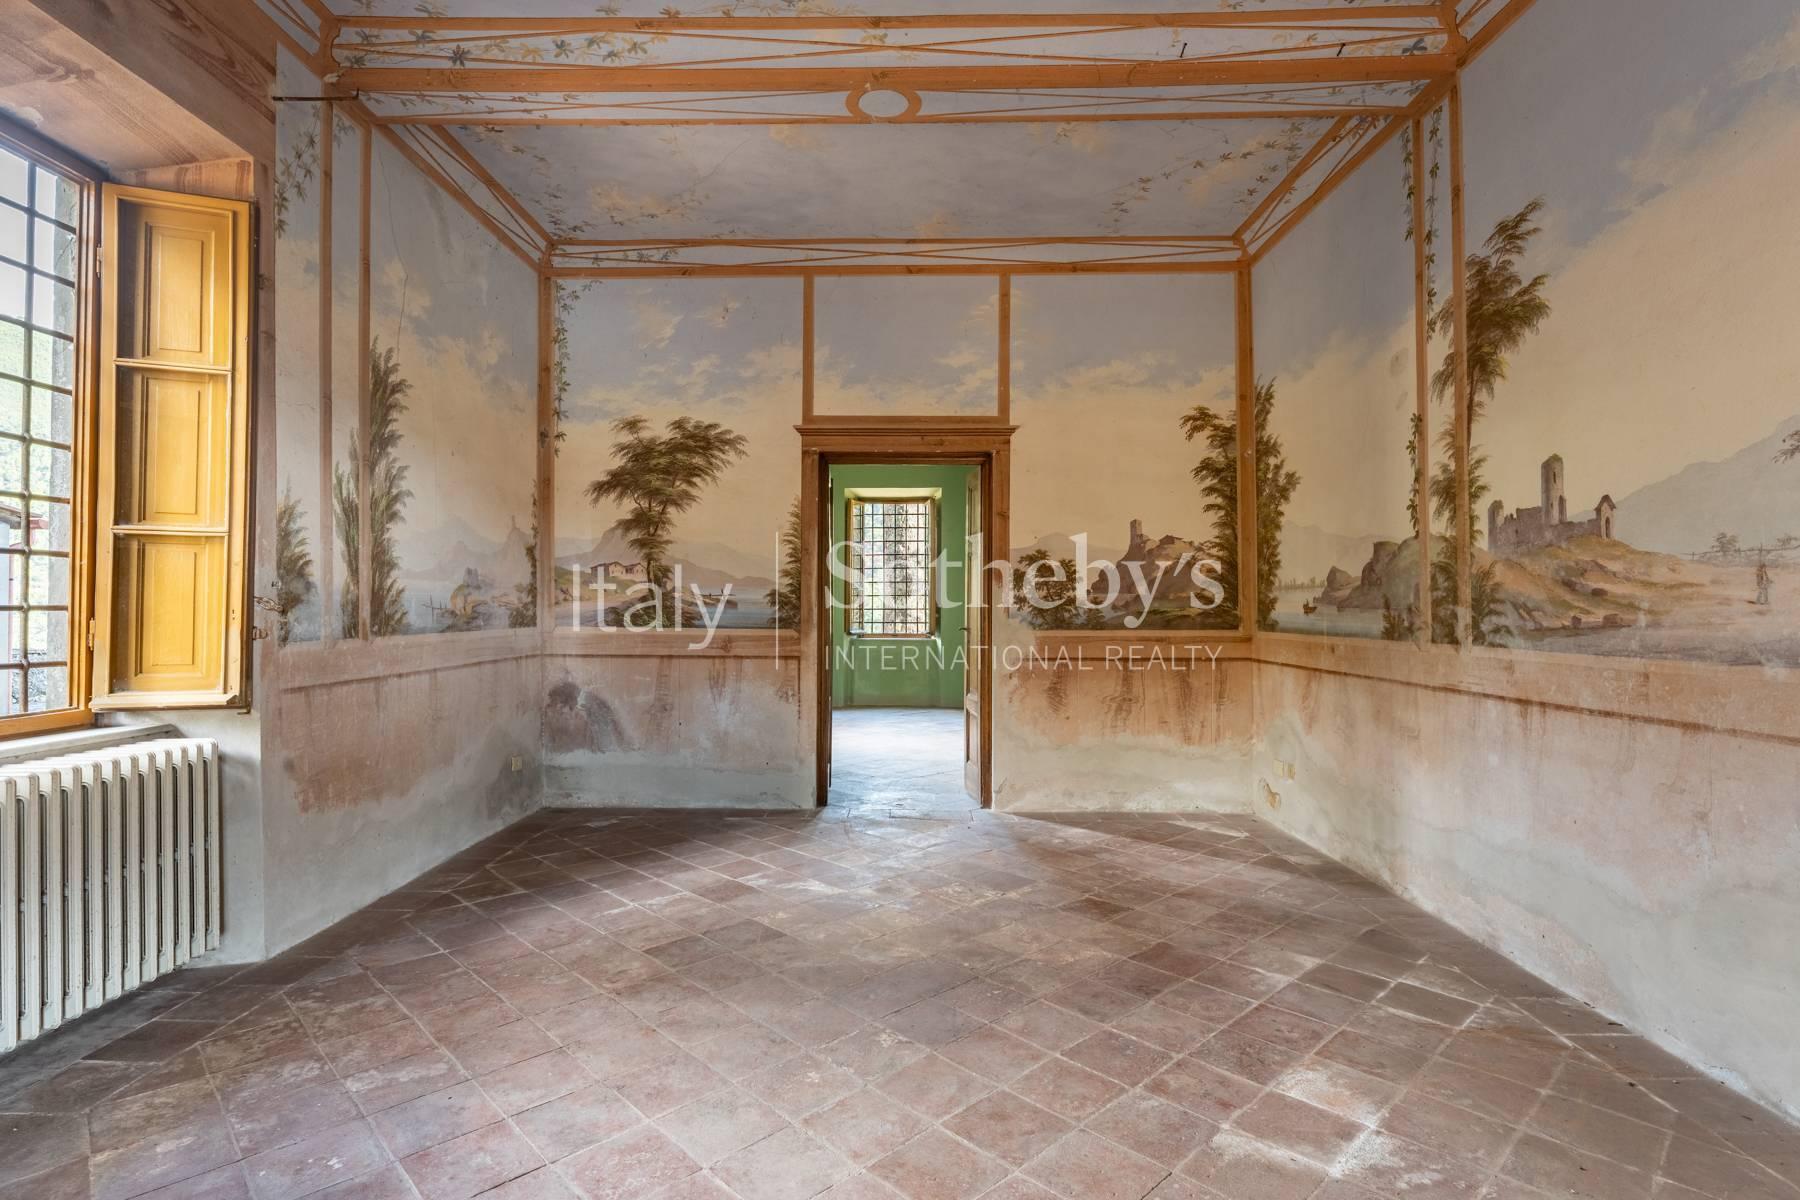 Superb villa with breathtaking views of the Lucca countryside - 6